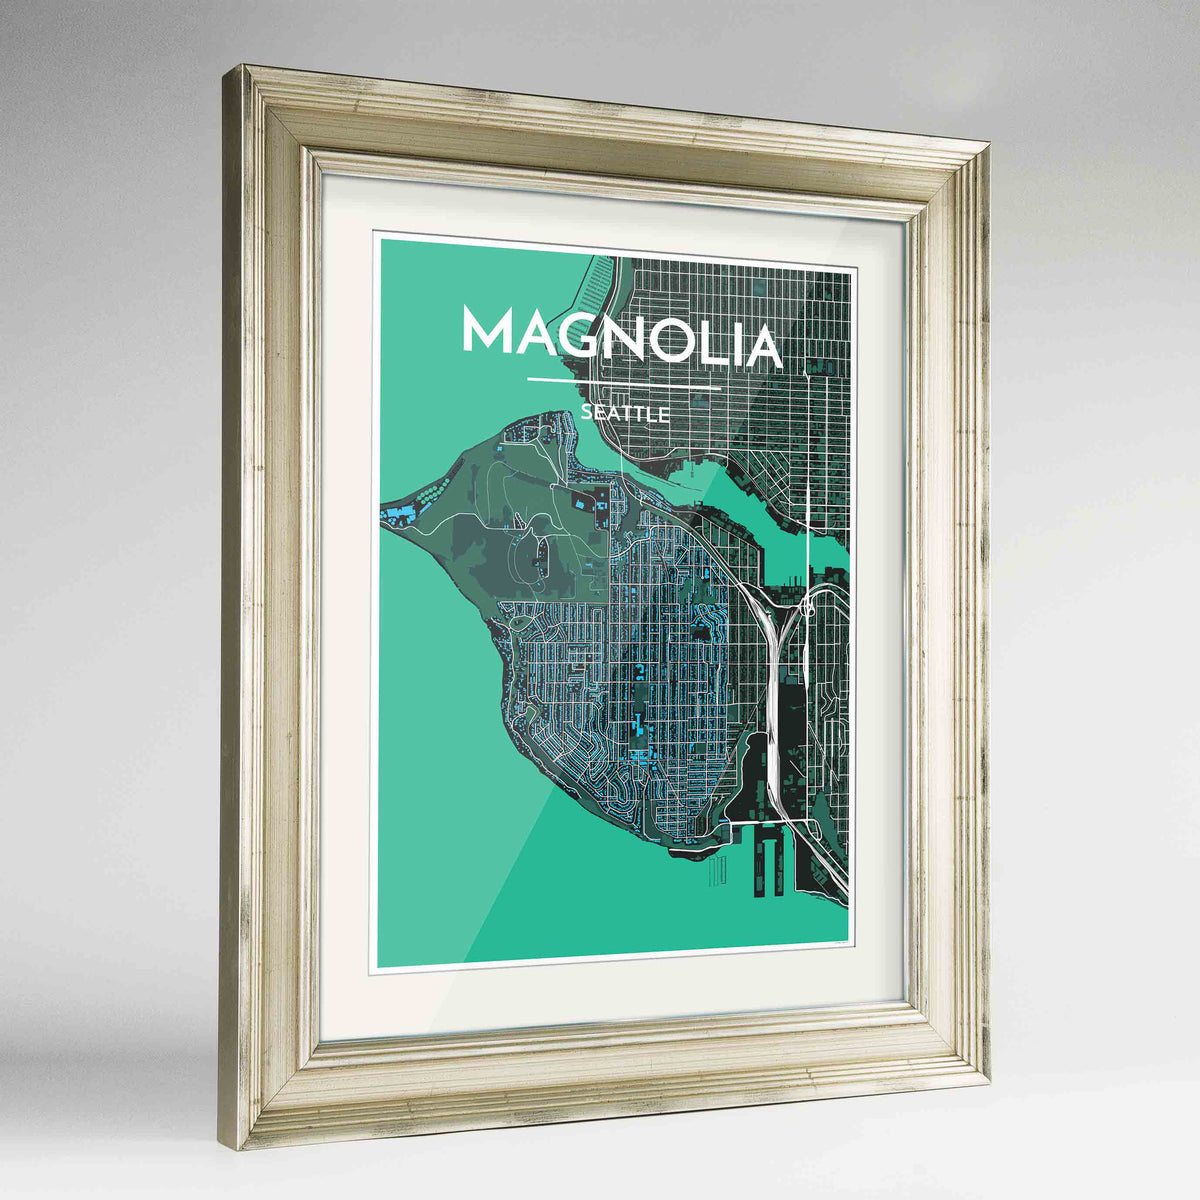 Framed Seattle Magnolia Neighbourhood Map Art Print 24x36&quot; Champagne frame Point Two Design Group